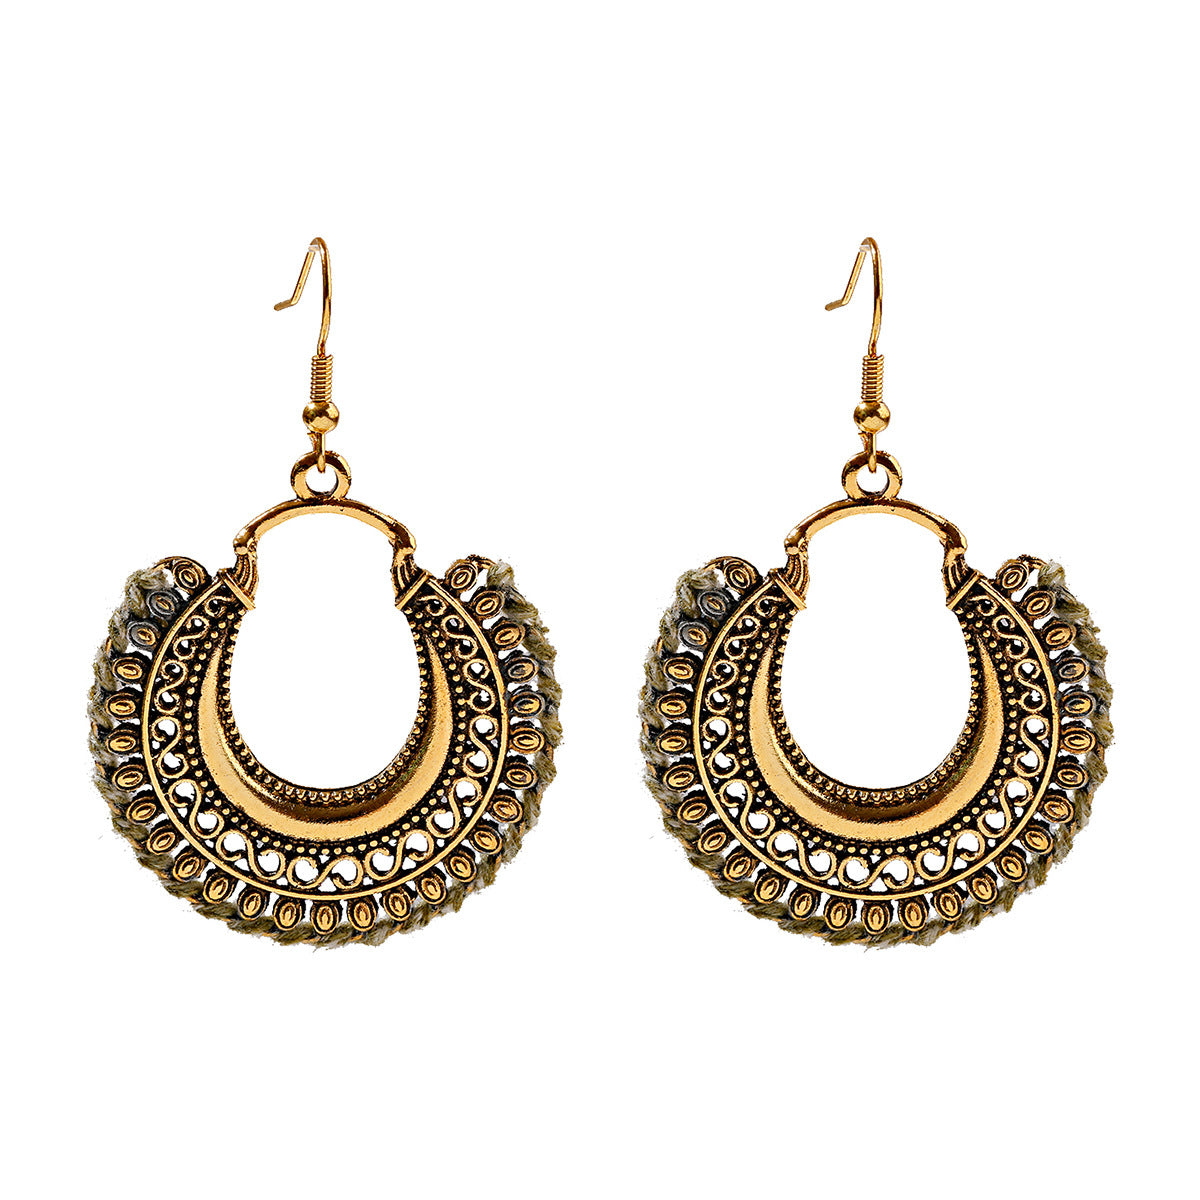 1 Pair Casual Retro Round Braid Hollow Out Alloy Drop Earrings